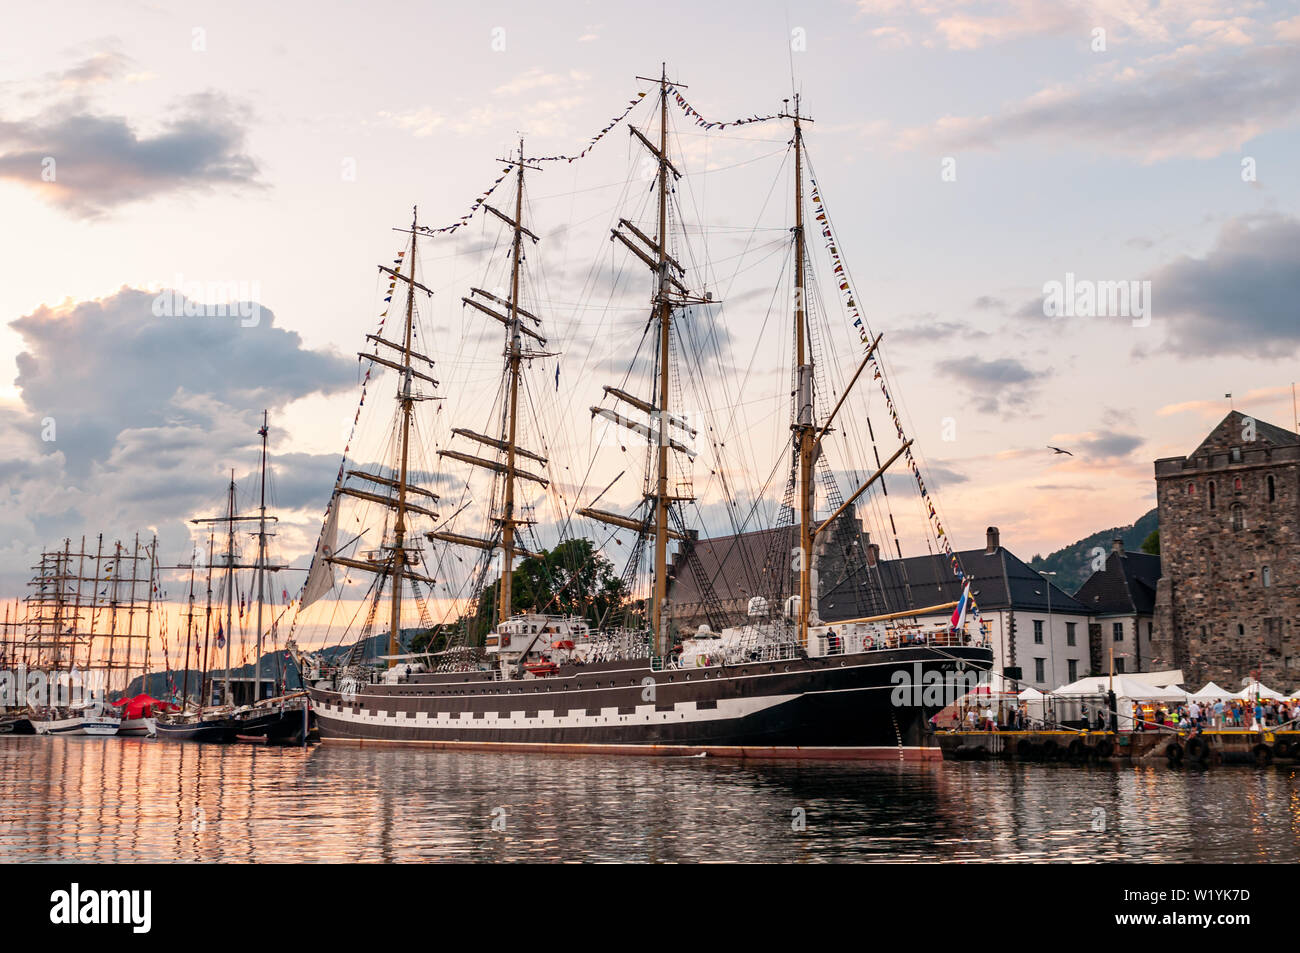 A photo of the Kruzenshtern or Krusenstern (Russian: Крузенштерн) four-masted barque ship, docked at Bergen harbour Norway Stock Photo